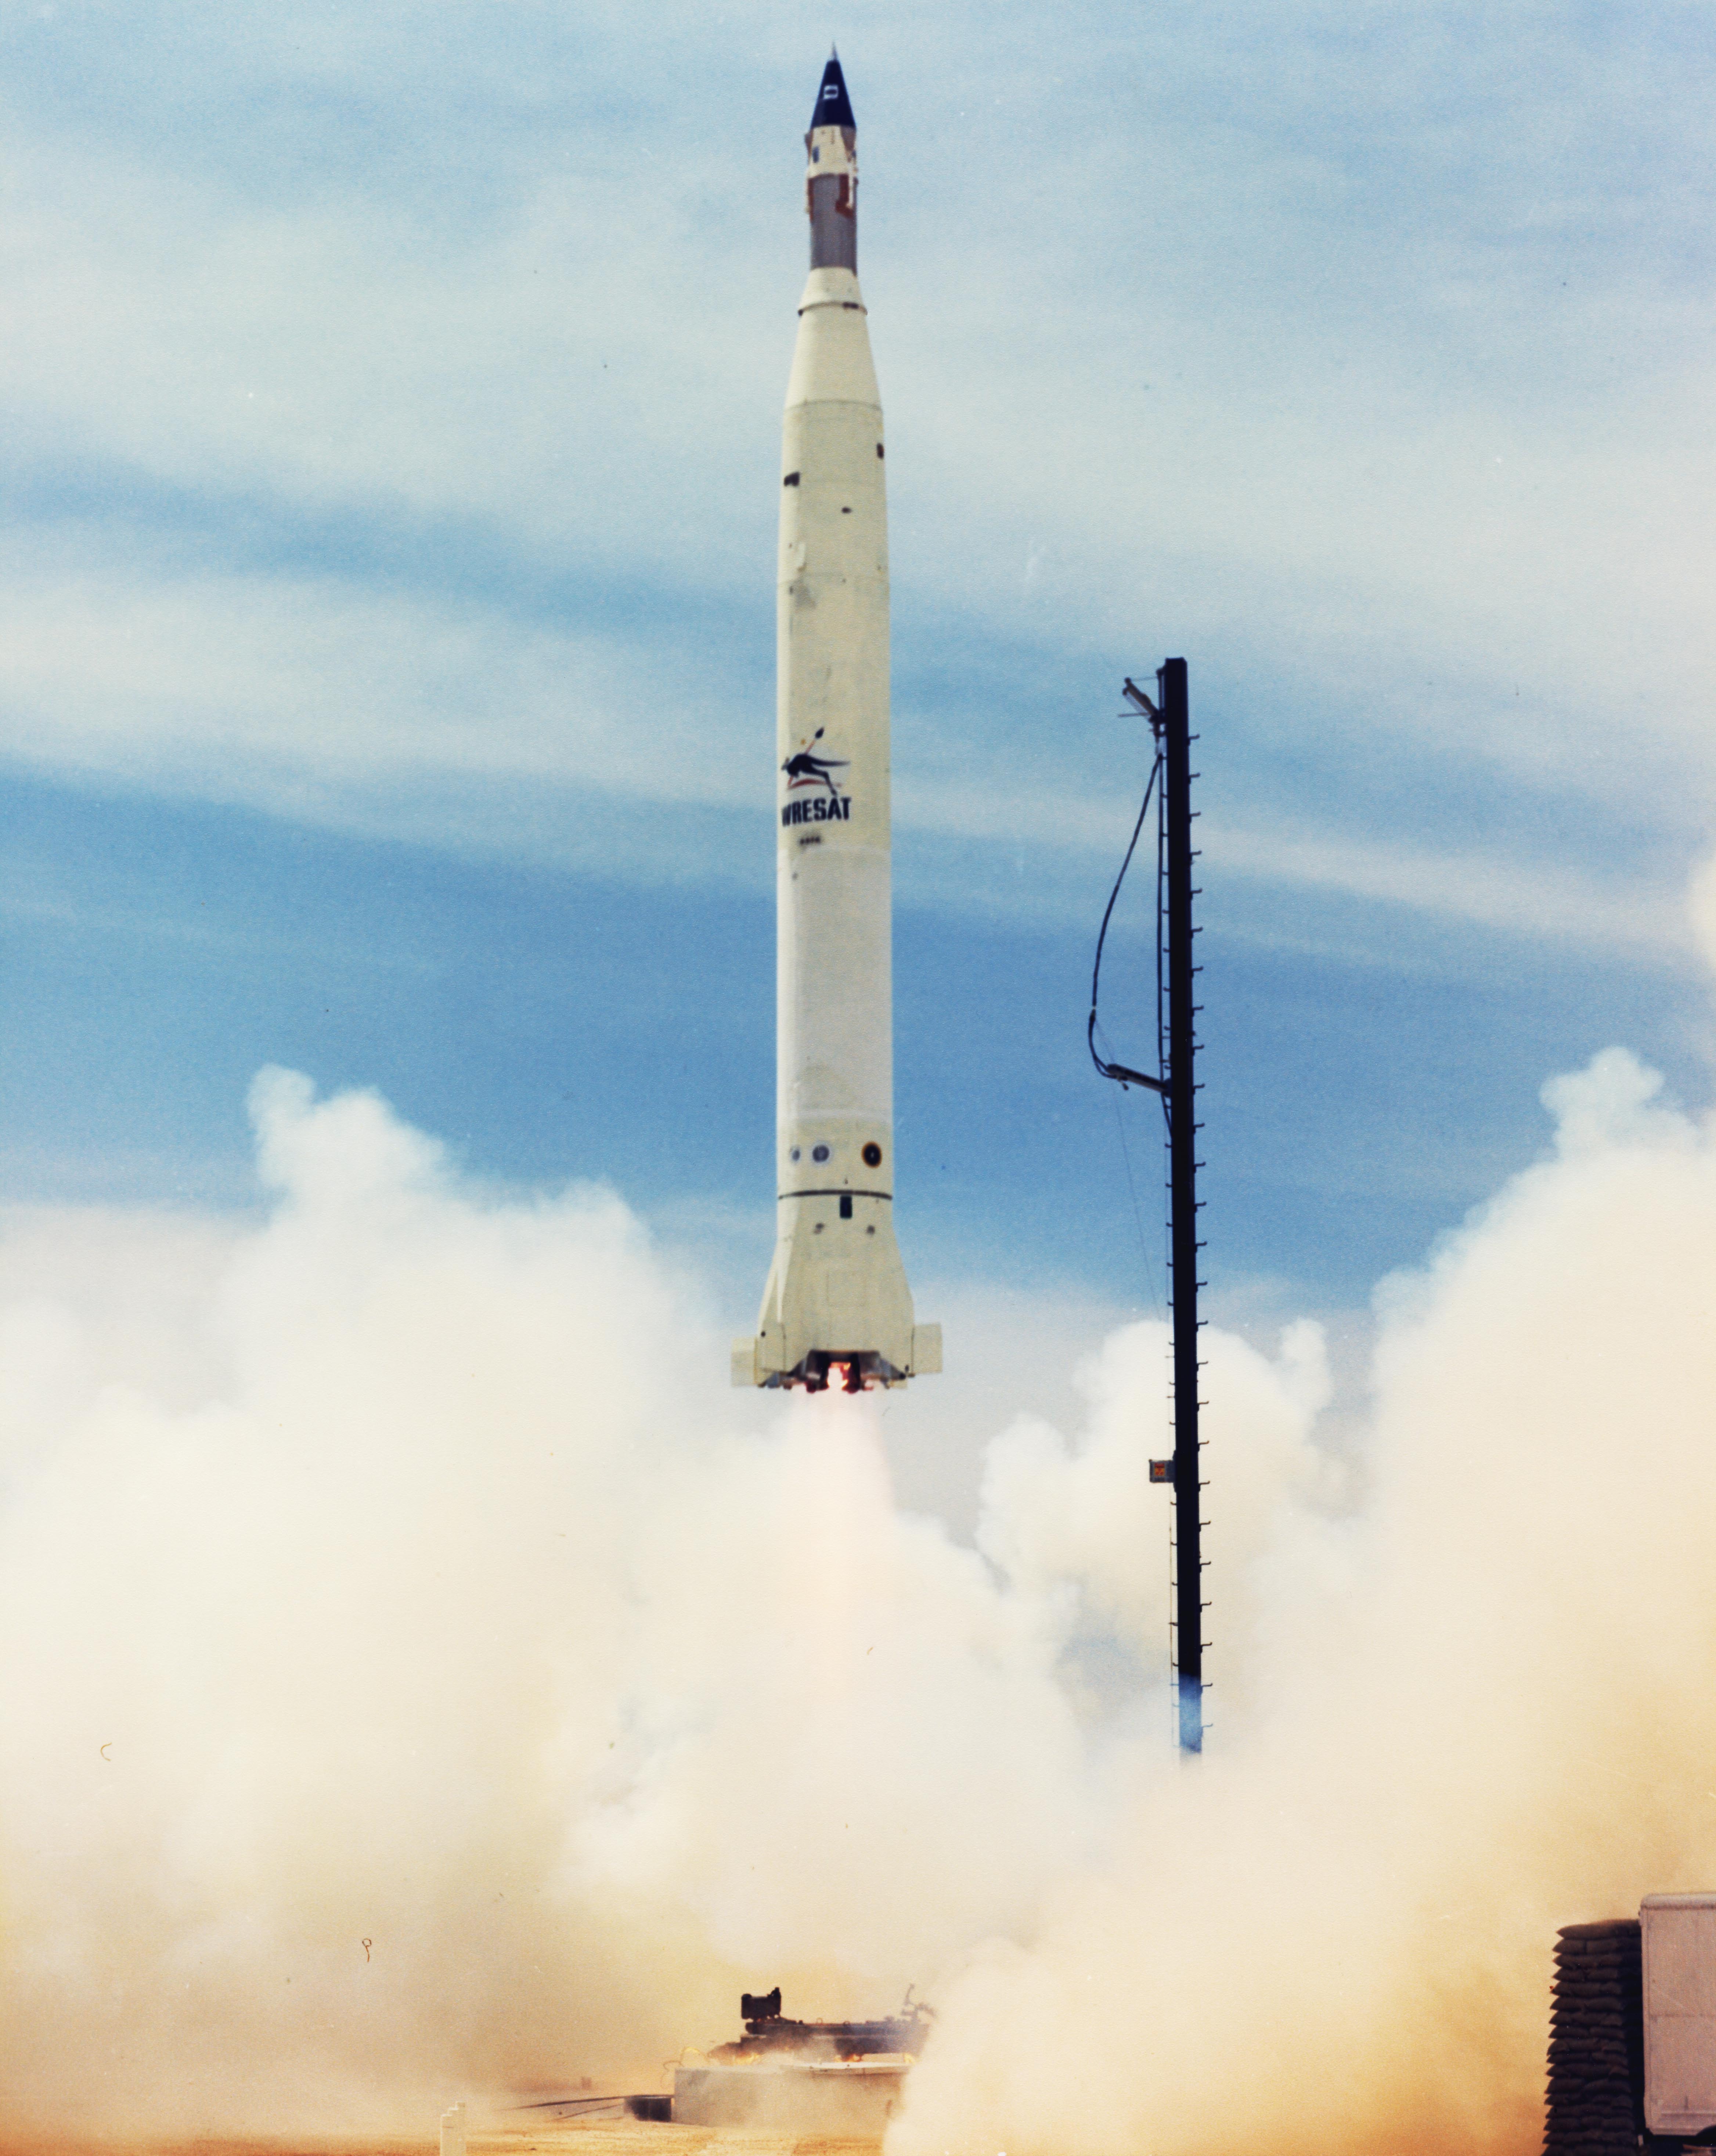 The launch of WRESAT on the Redstone rocket. Photo courtesy of Prof John Carver.